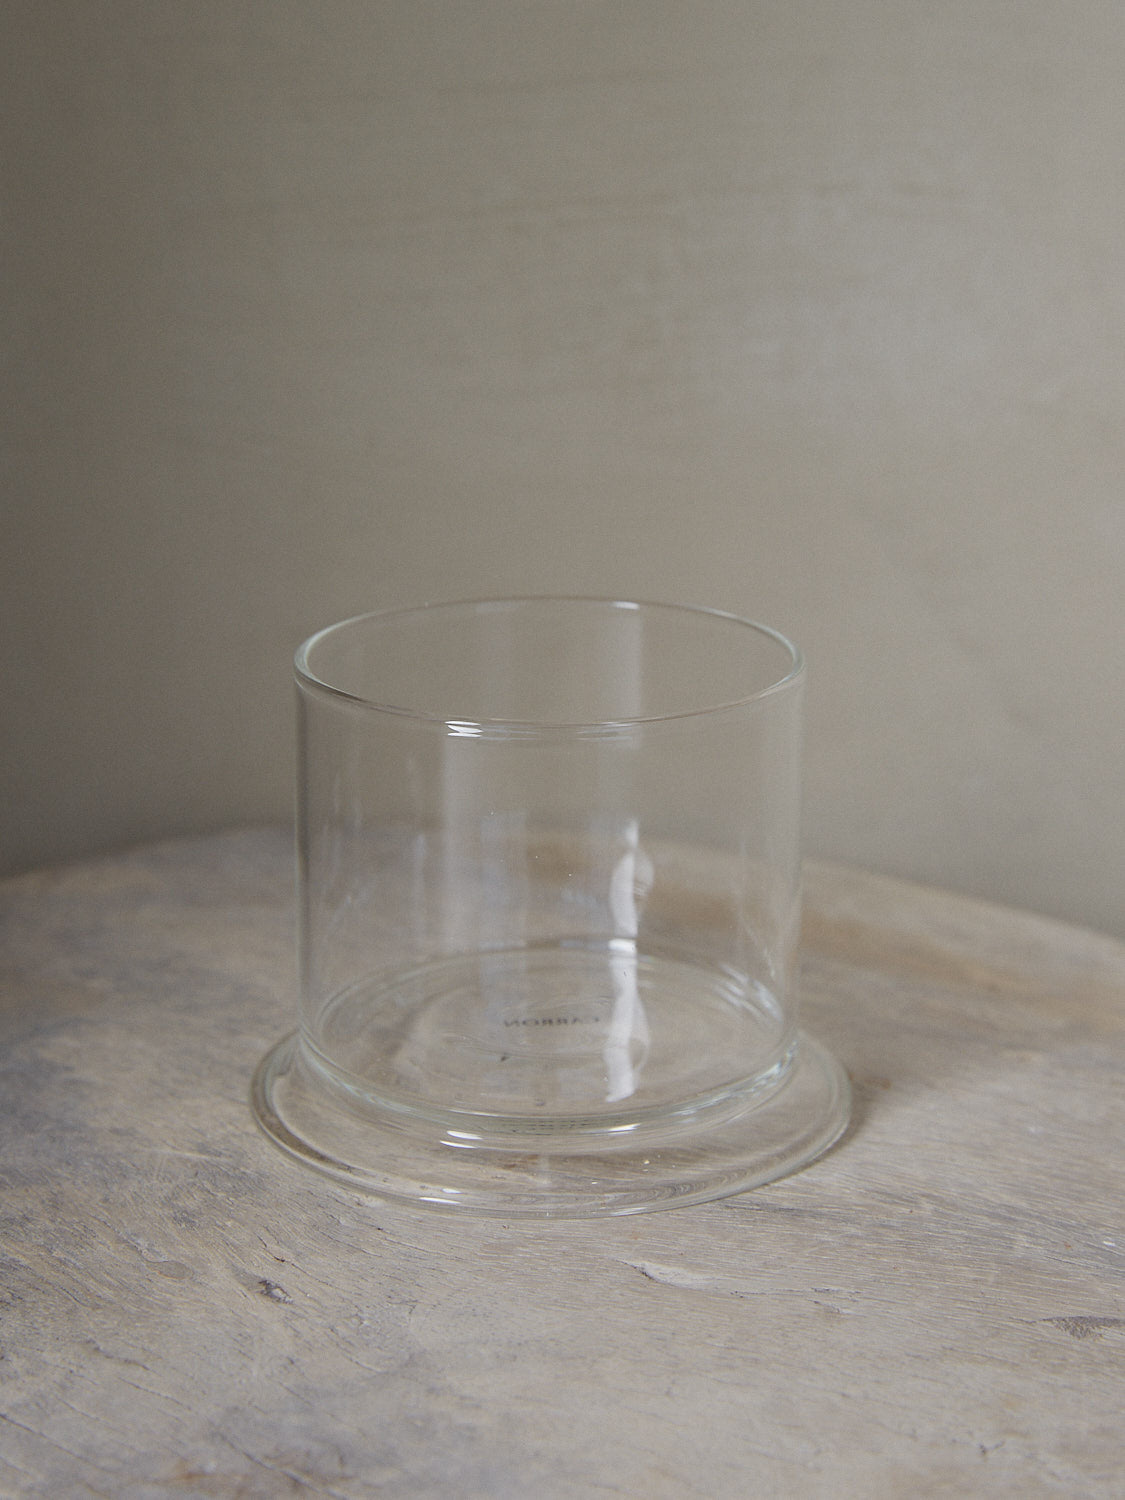 Small Paris Glass. Simple, understated drinking glass designed by Mathilde Carron-Astier de Villatte and mouth blown in borosilicate glass.